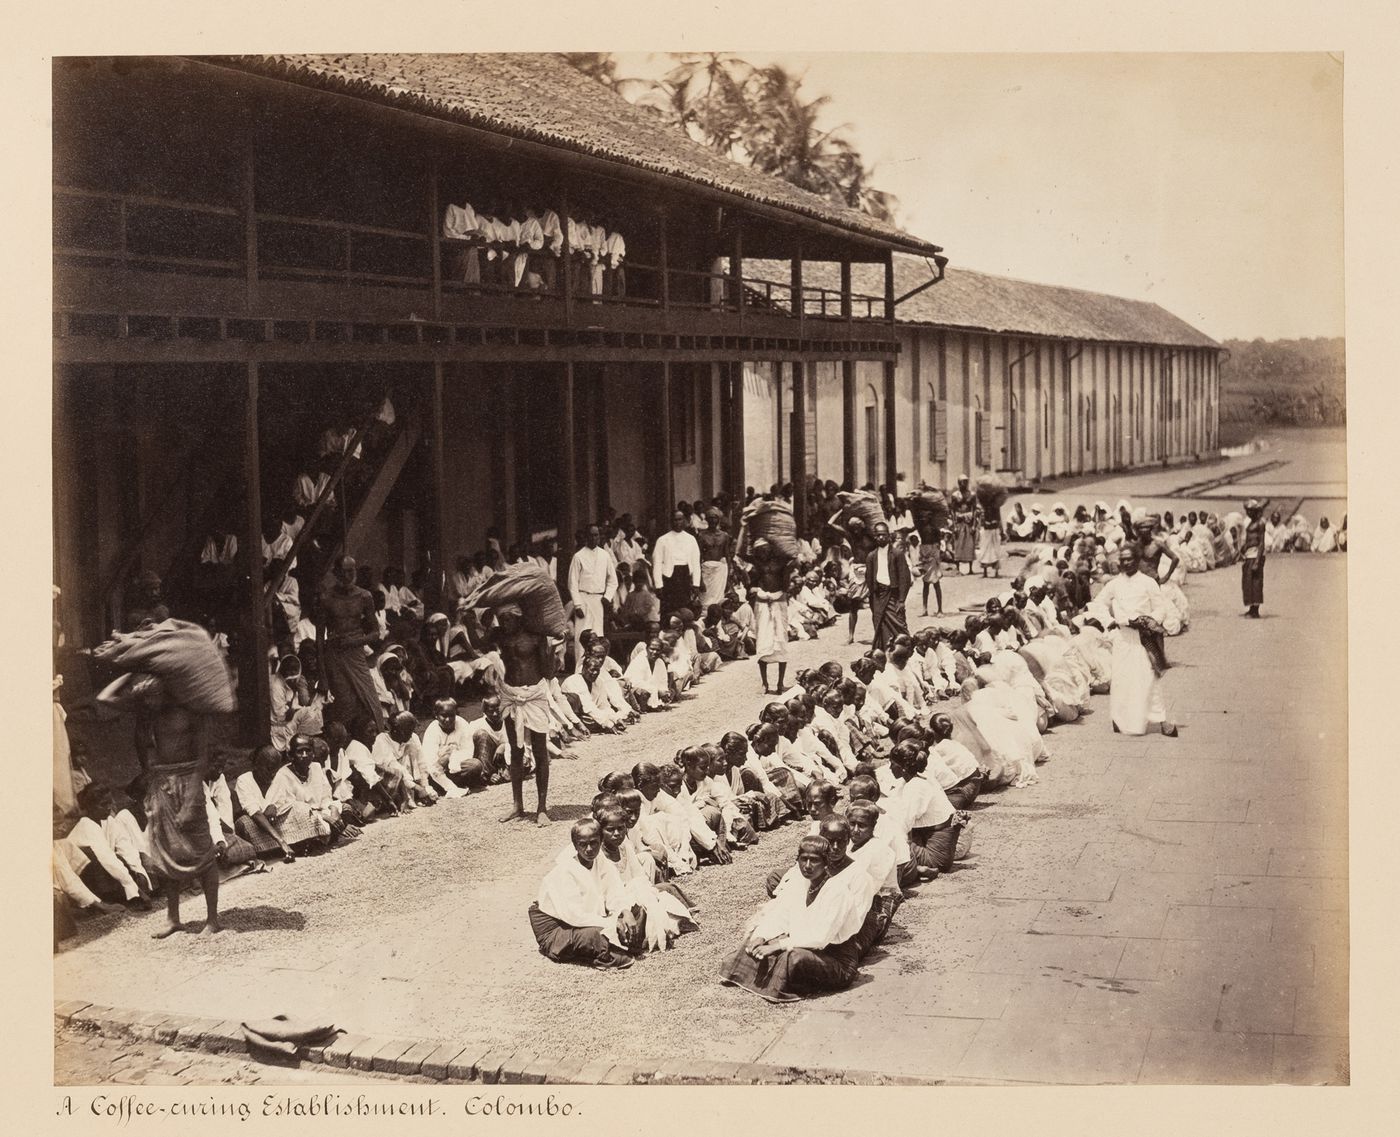 View of workers sitting in front of a building, Colombo, Ceylon (Sri Lanka)